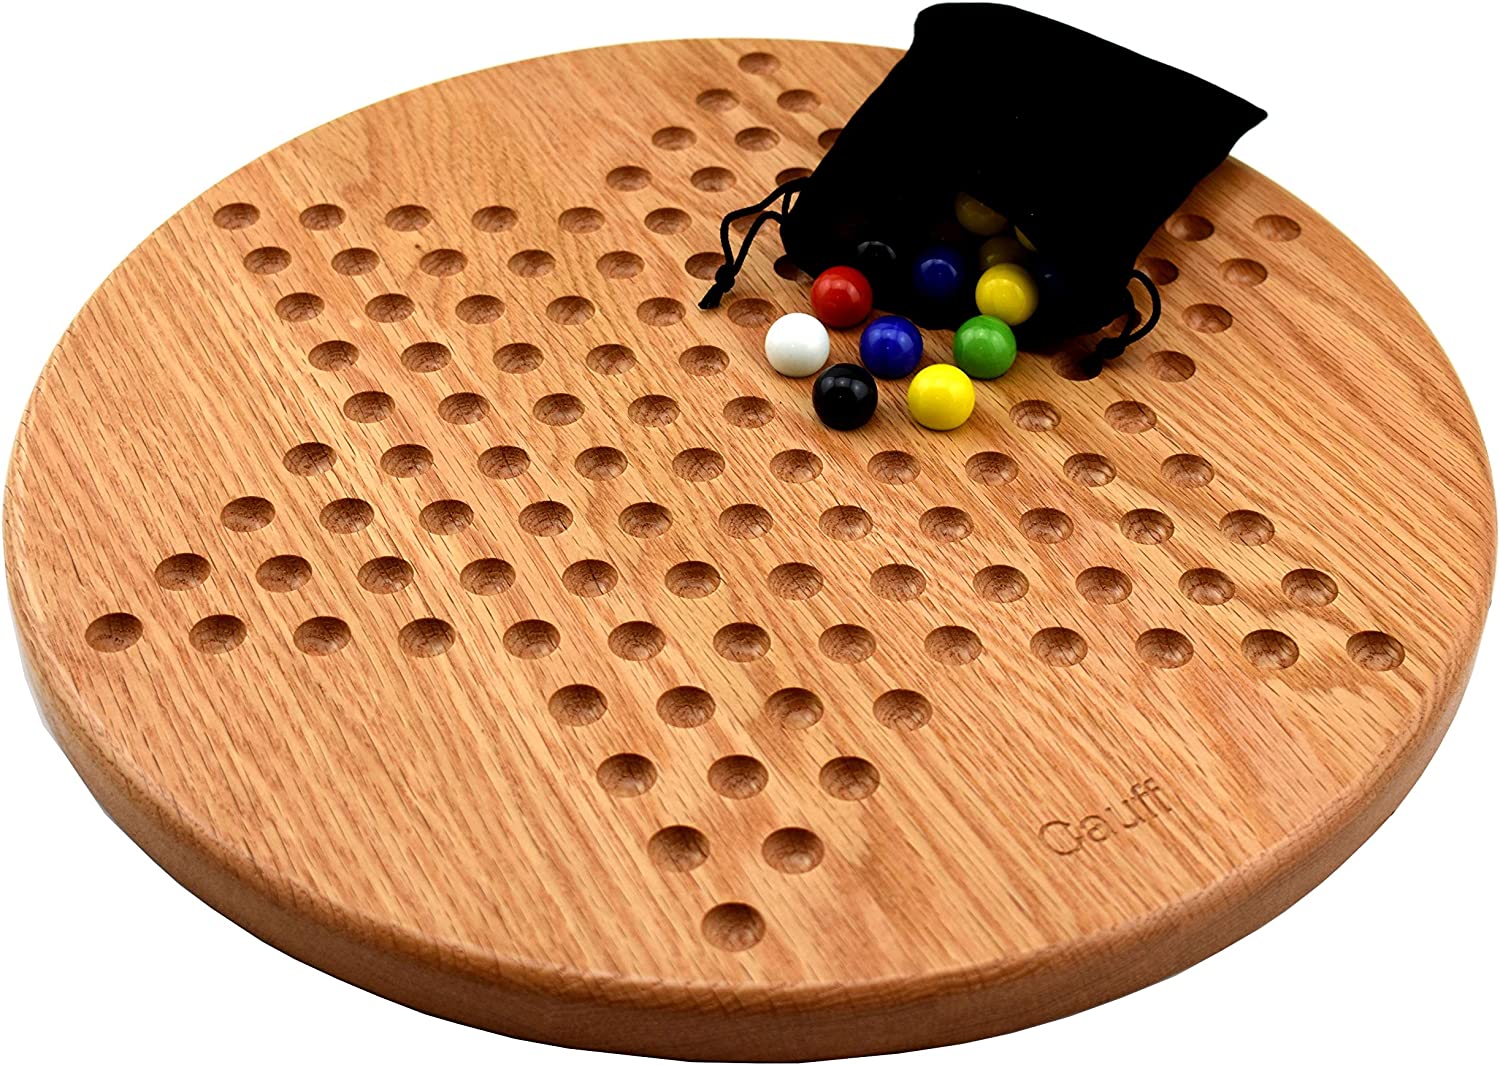 SOLID WOOD CHINESE CHECKERS